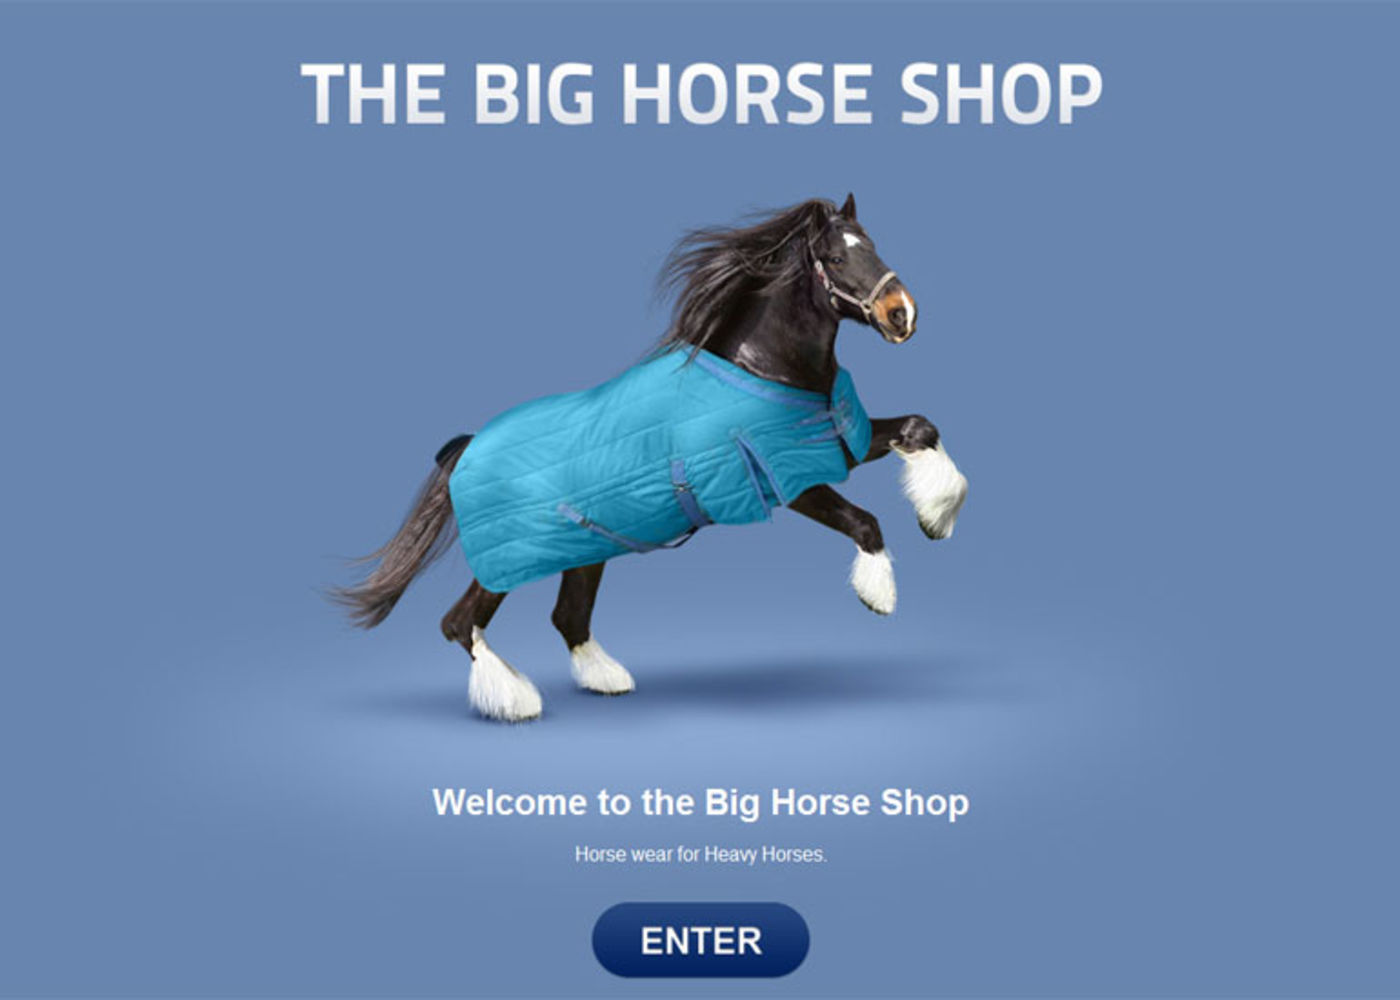 The Big Horse Shop (2009) Welcome